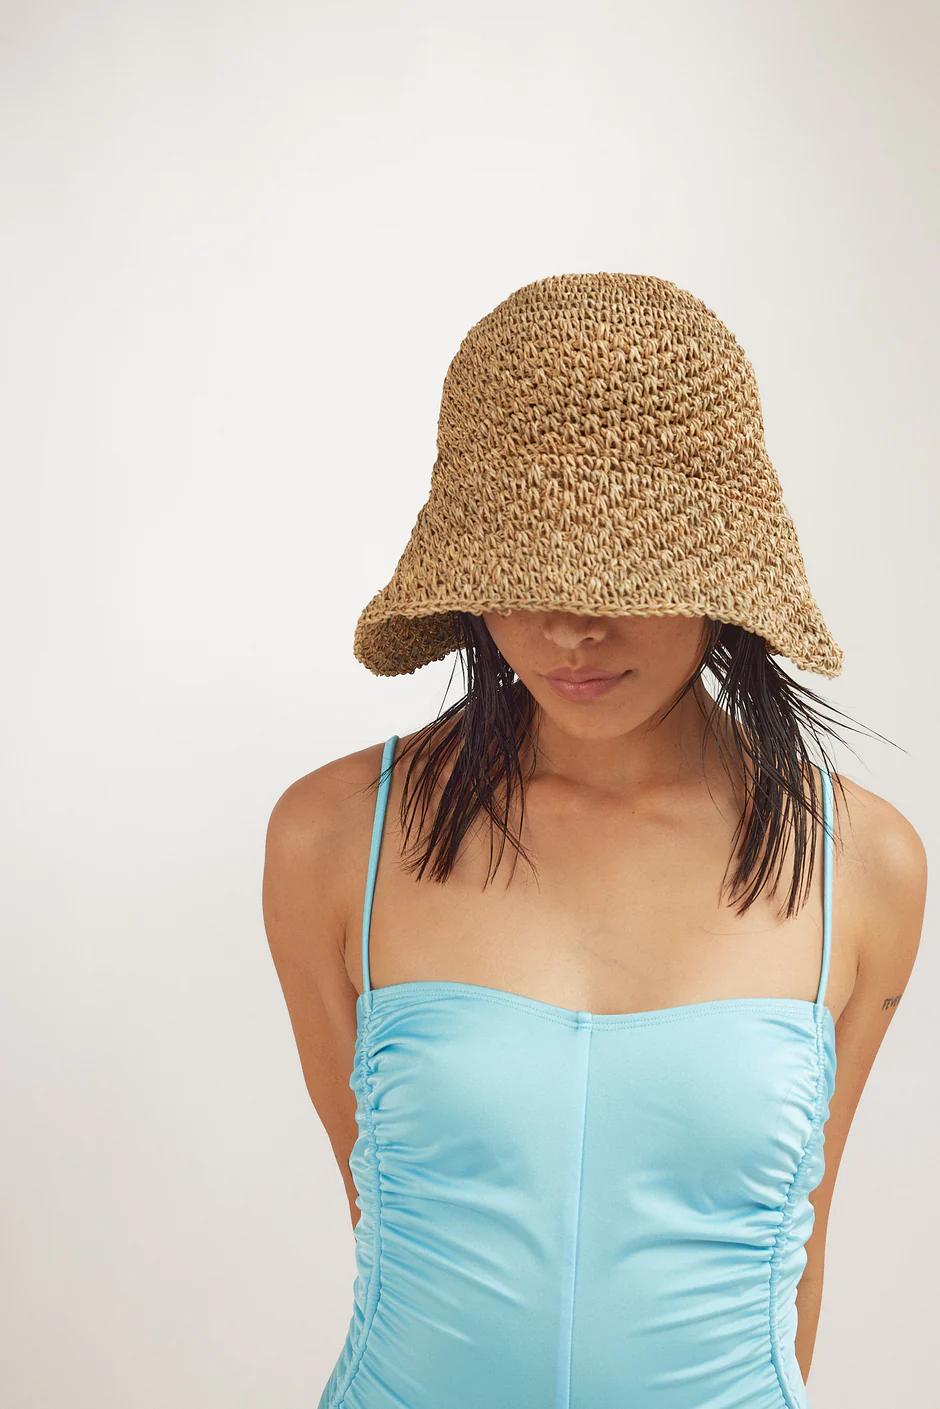 Product Image for Opia Hat, Seagrass Straw